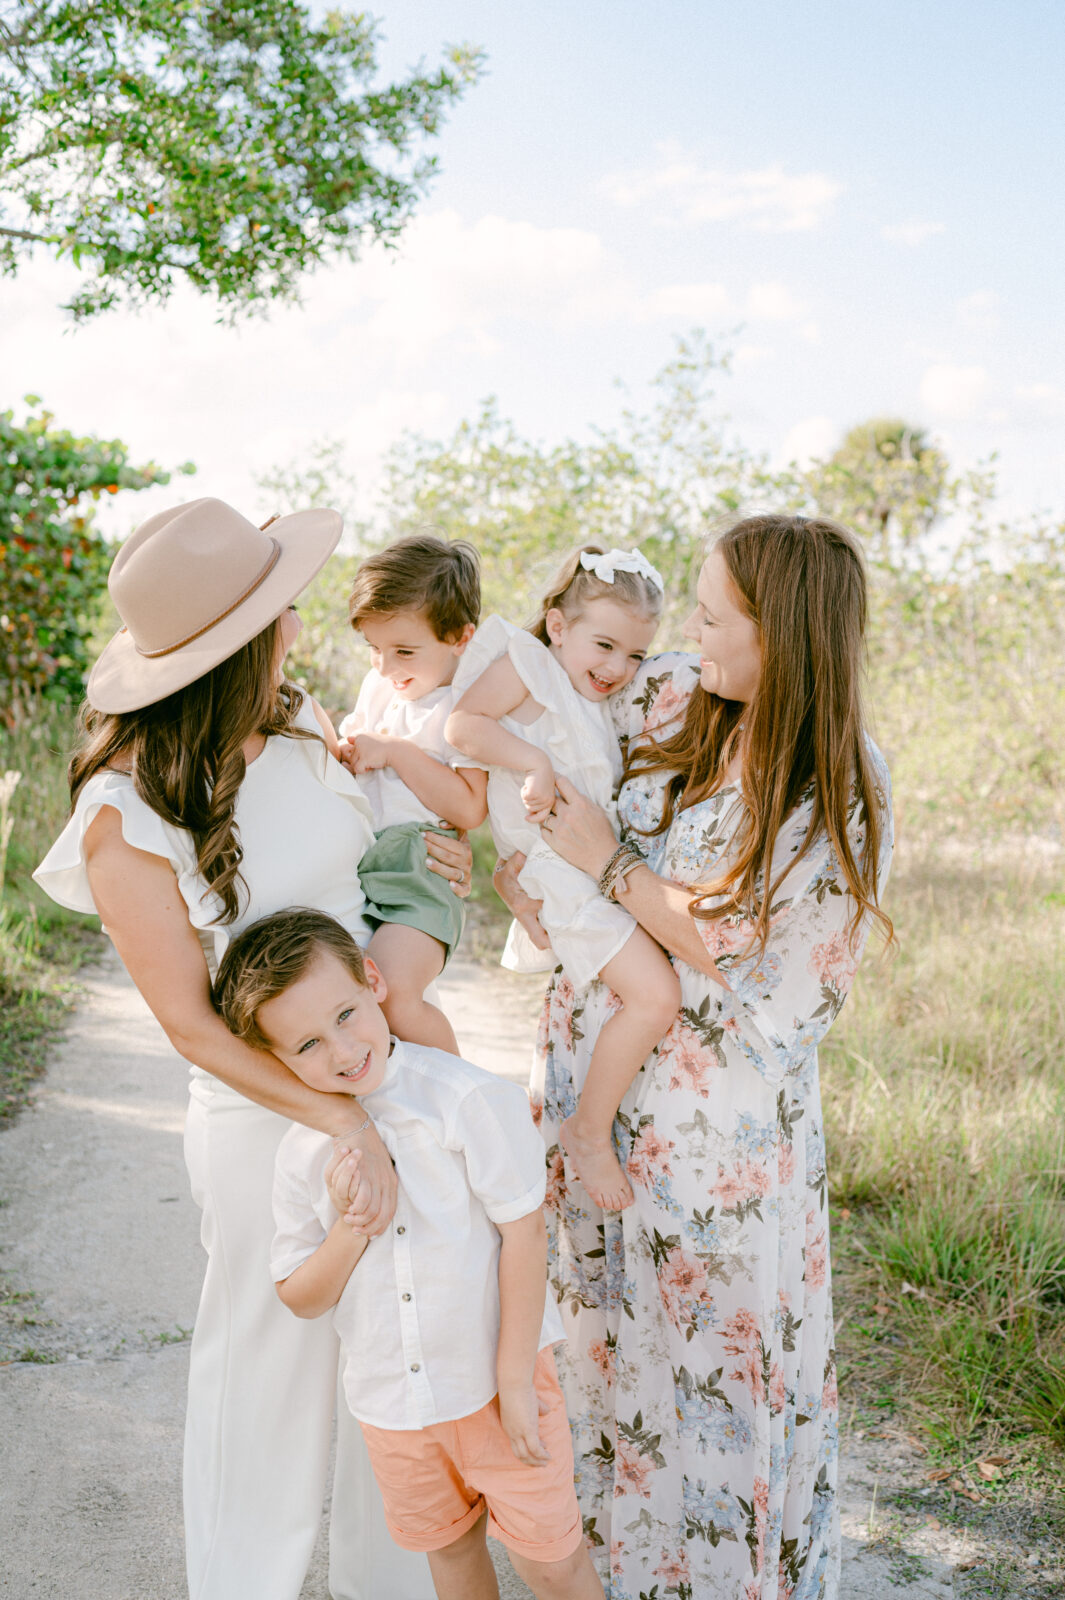 Favorite games to play during family photoshoot | Miami Photographer